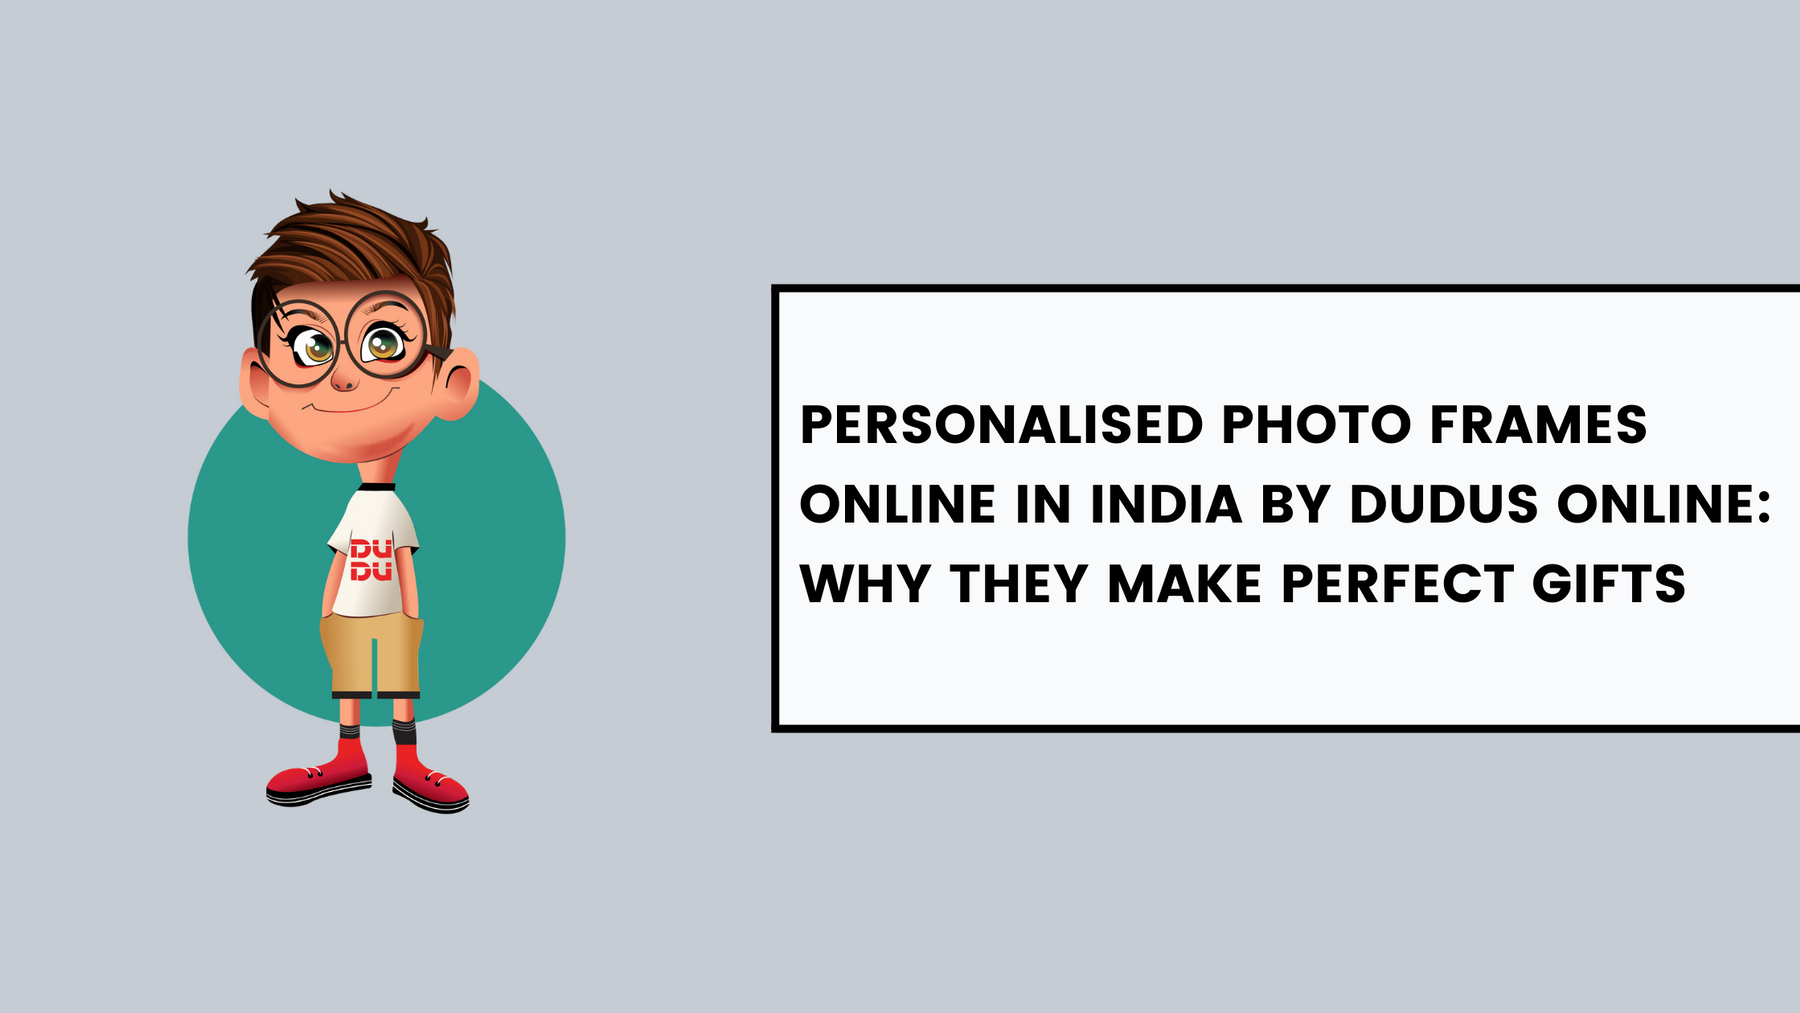 Personalised Photo Frames Online in India by Dudus Online: Why They Make Perfect Gifts